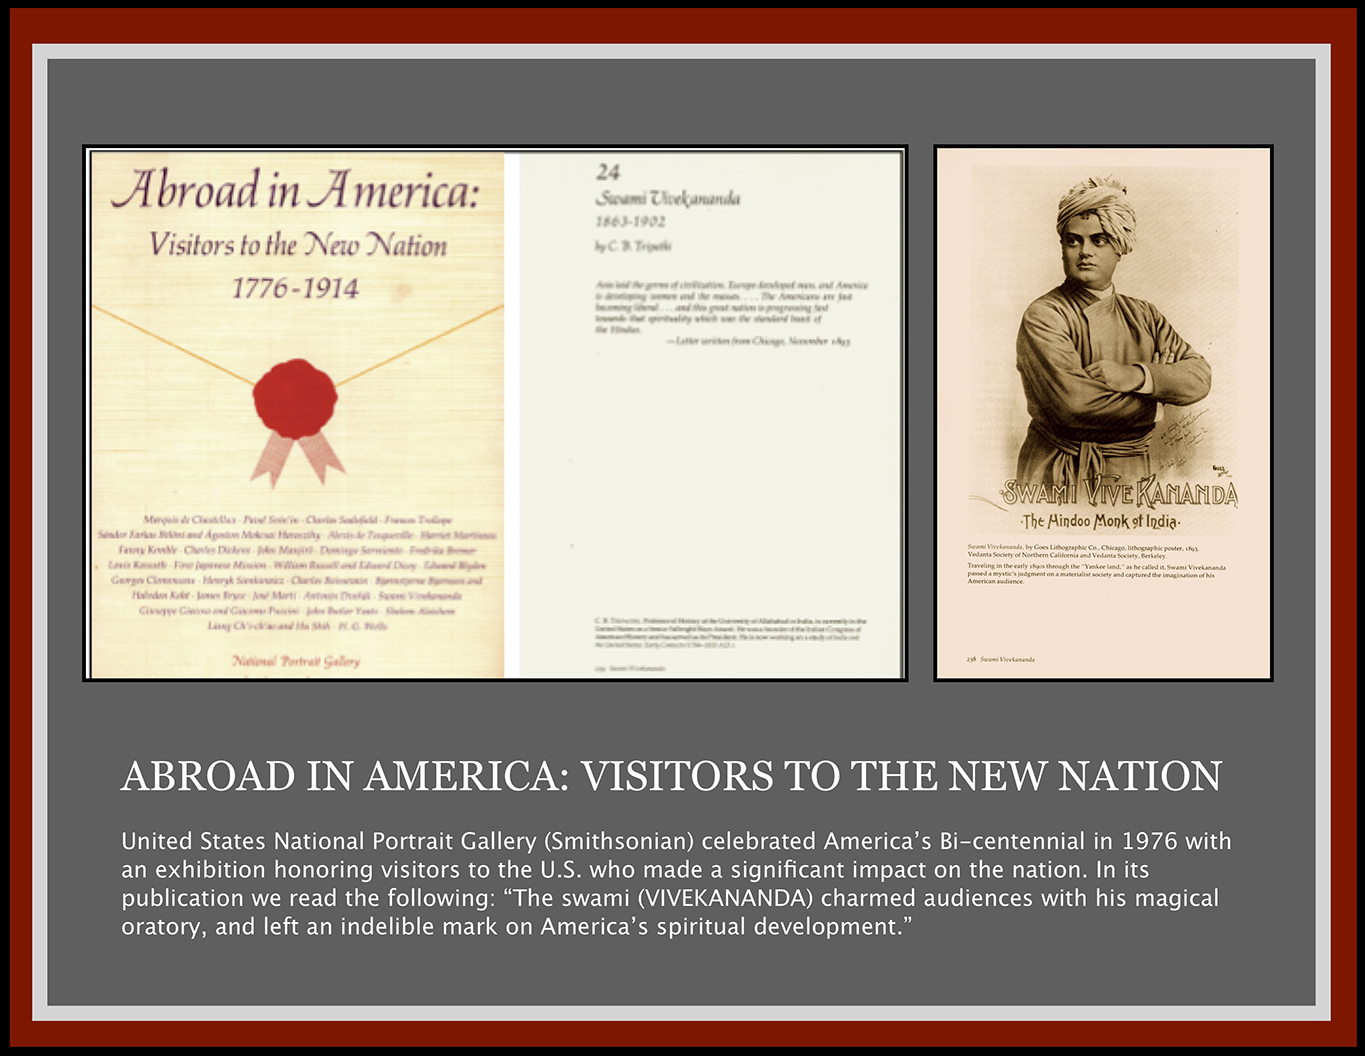 Abroad in America: Visitors ot the New Nation.